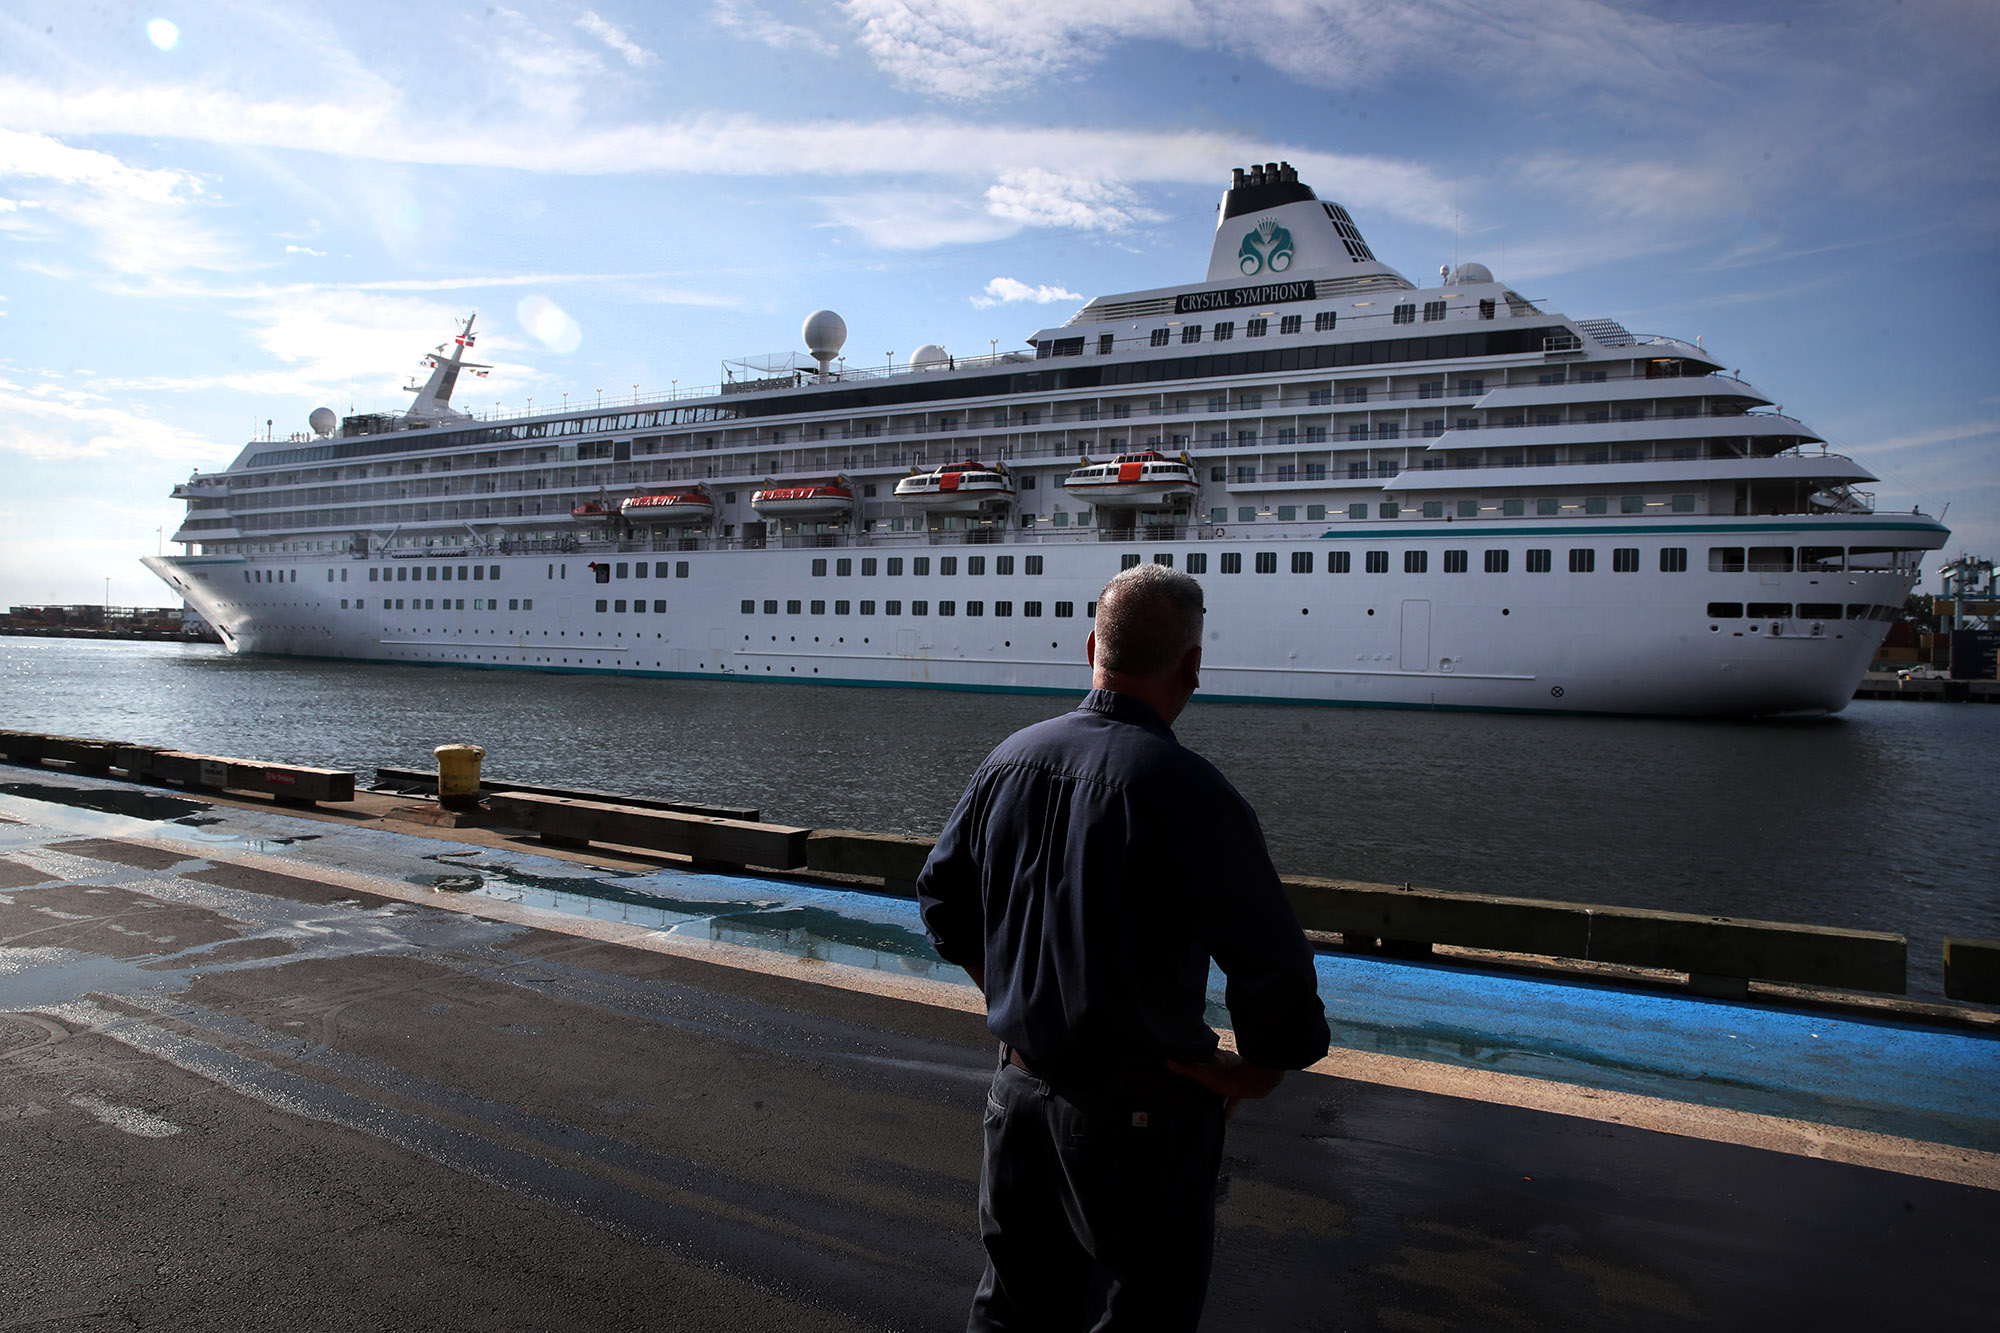 Onboard Justice: Legal Matters on Cruise Ships